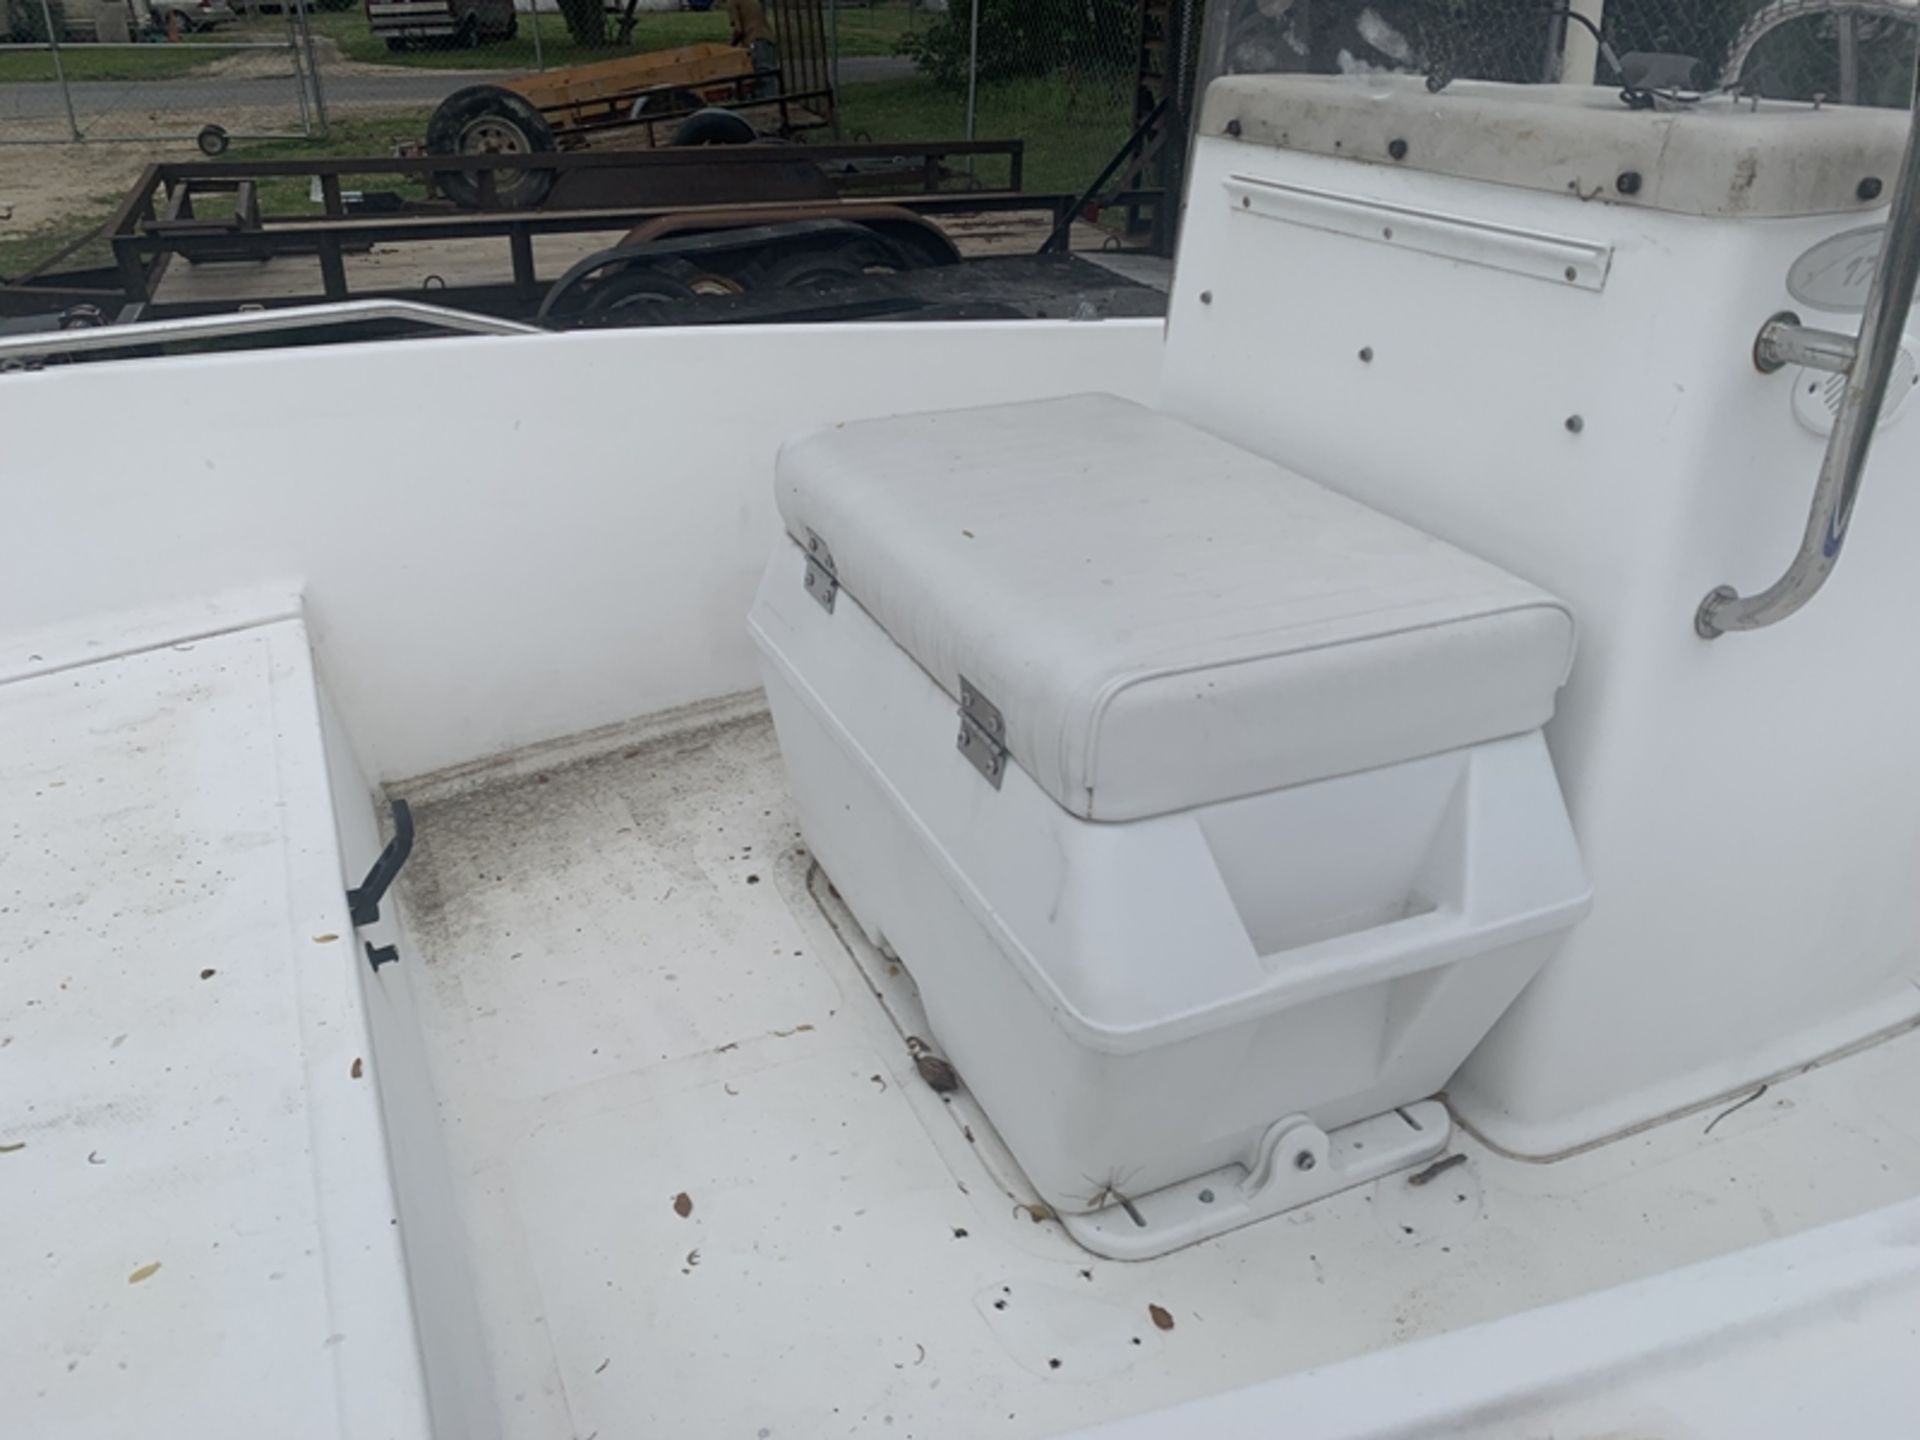 2003 SEA PRO 170 17' fiberglass center console with Yamaha 115 and trailer - HULL ID - PIOLB978K203 - Image 7 of 9